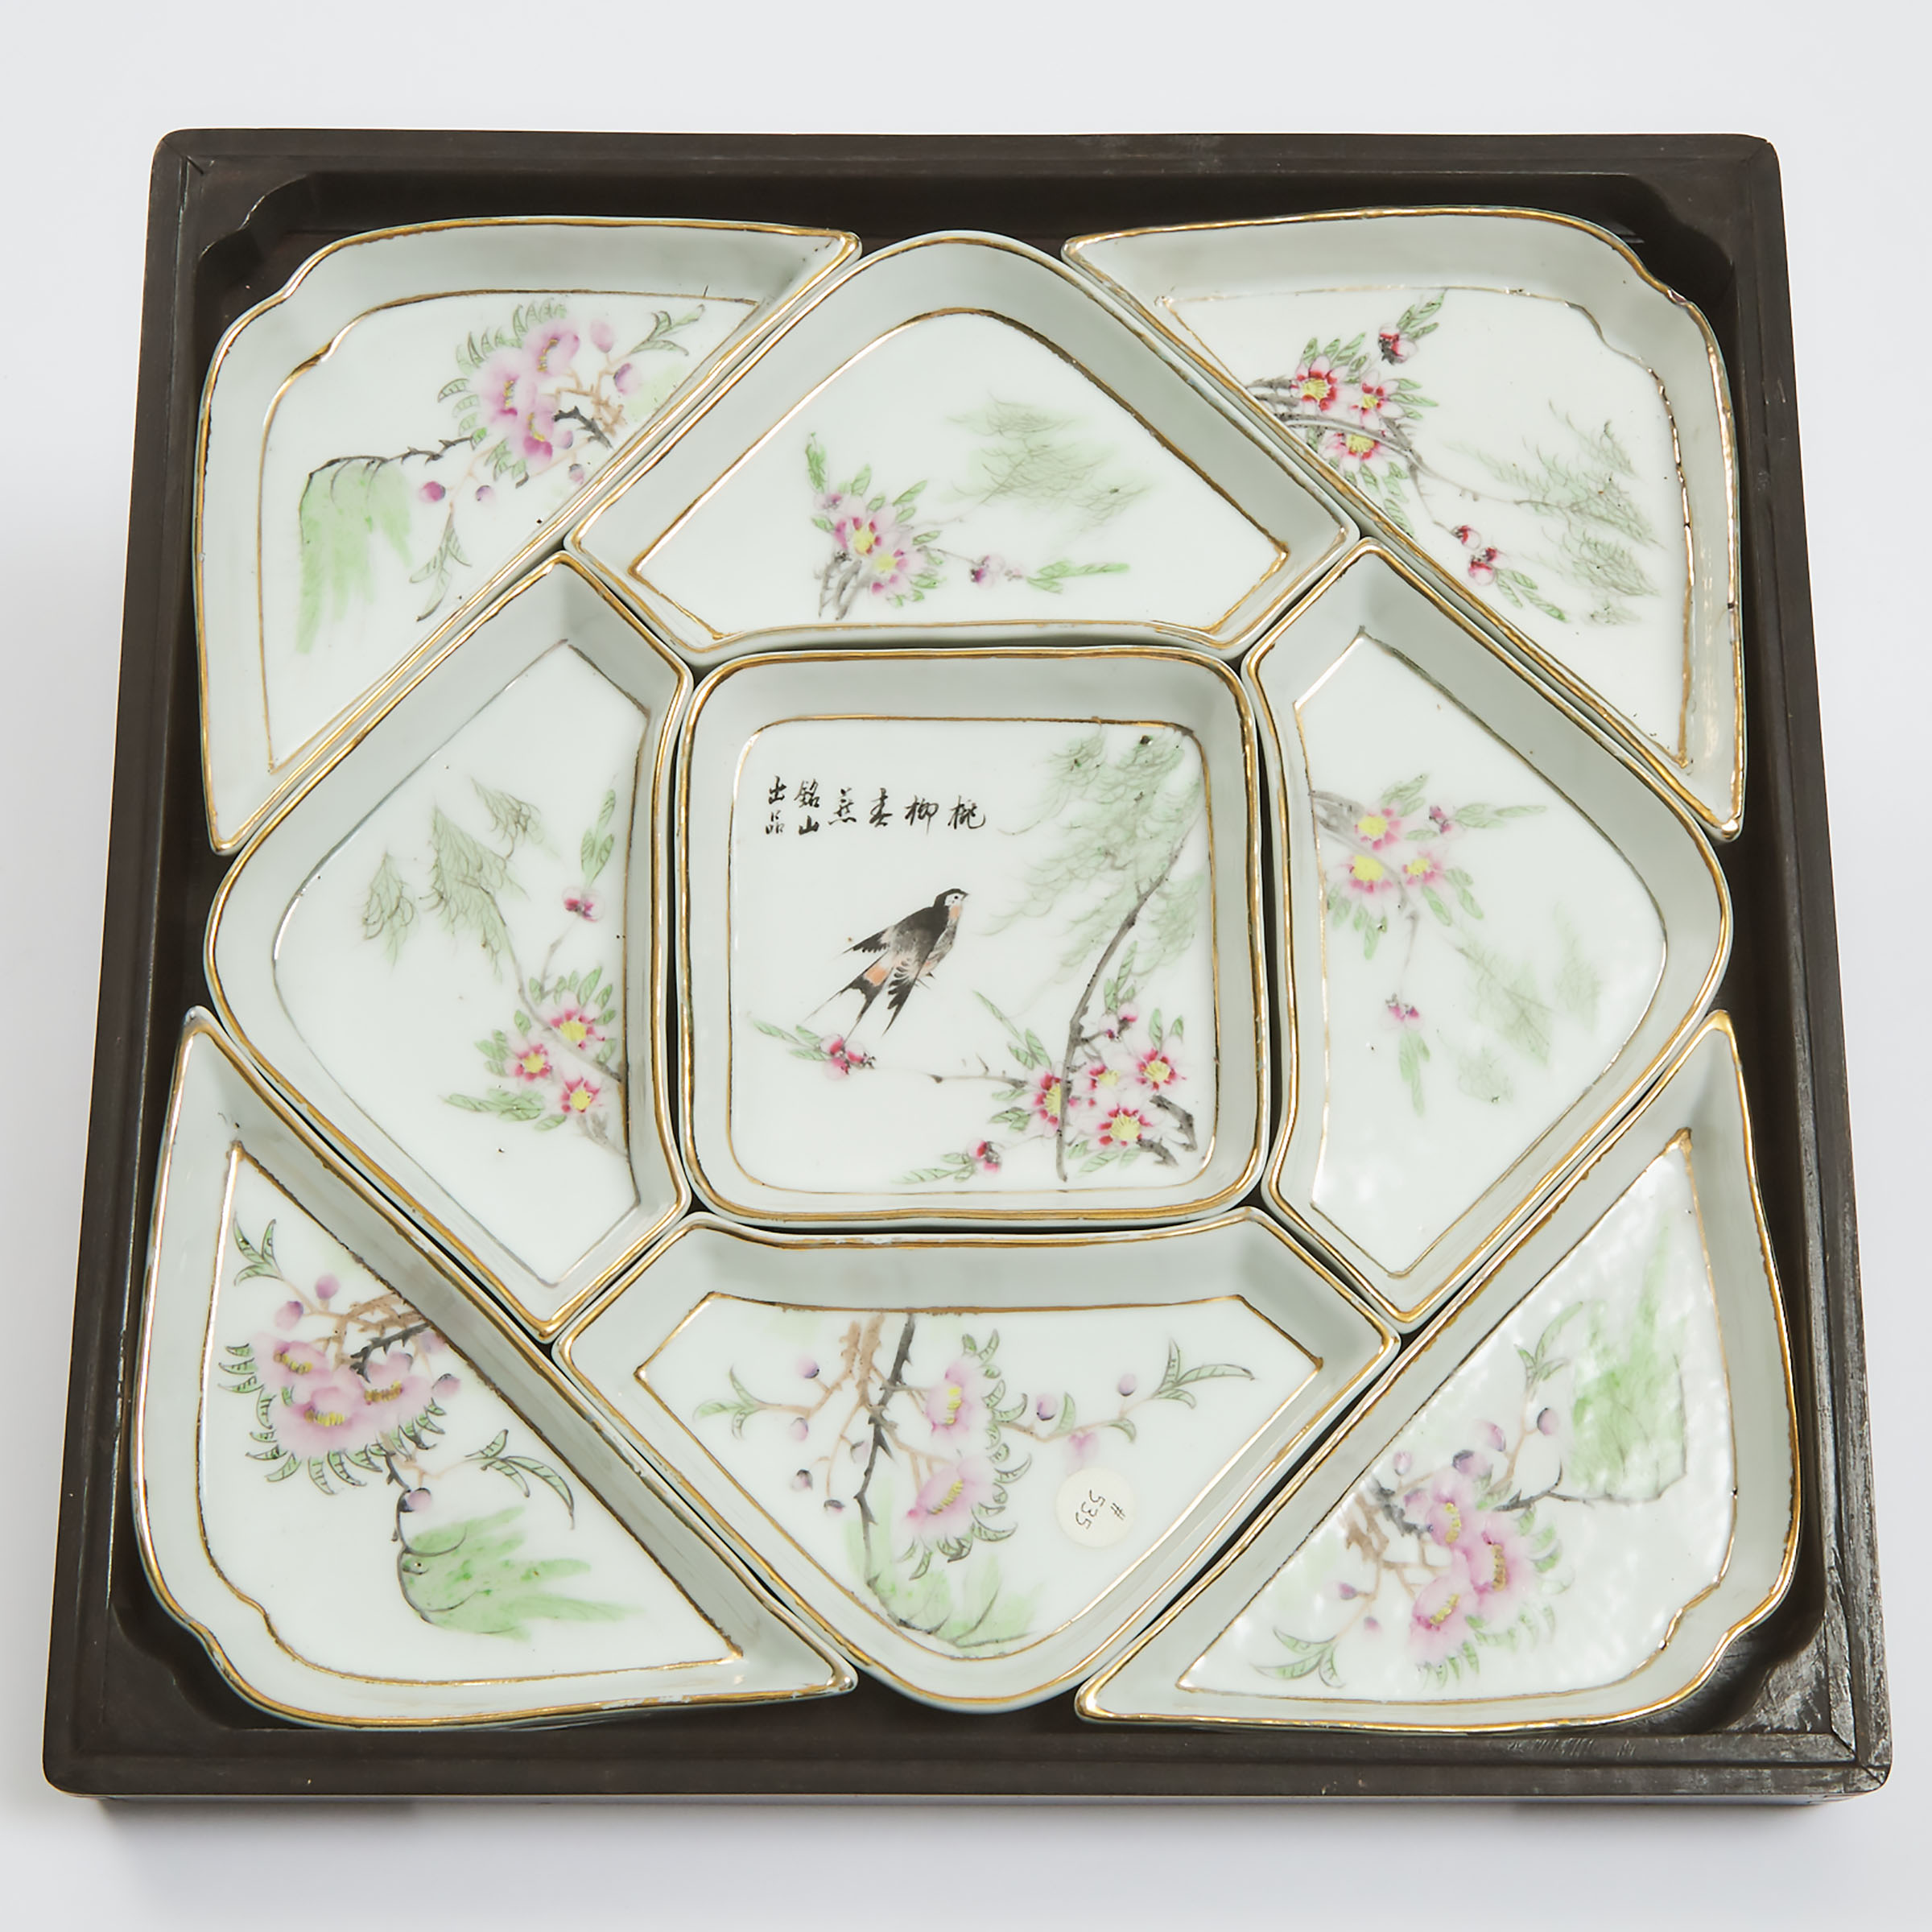 A Set of Nine Famille Rose 'Floral' Sweetmeat Dishes, Together With a Box and Glass Cover, Republican Period